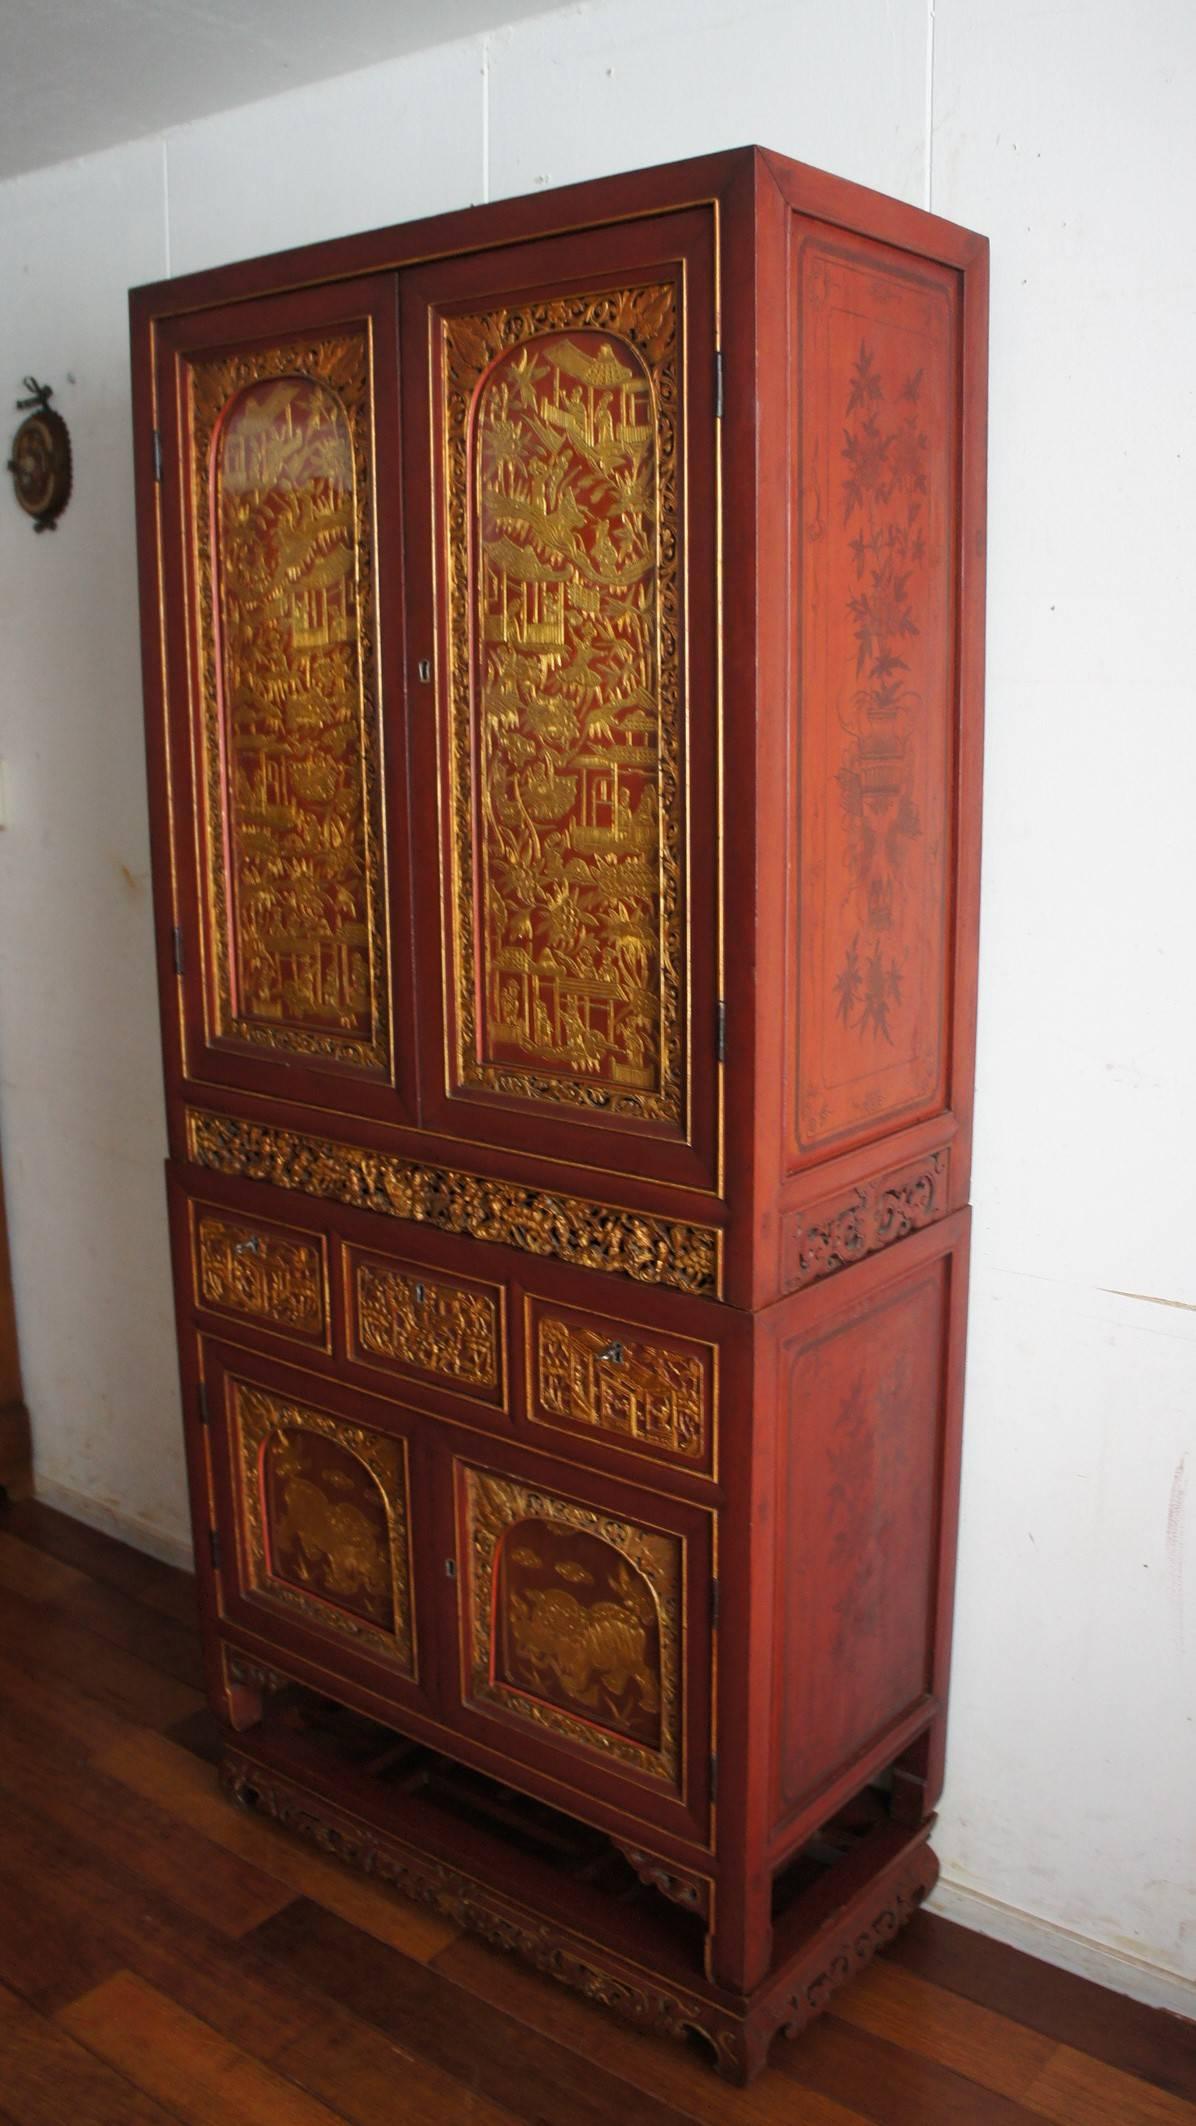 Rare and highly decorative Sumatran cabinet.

Some chances you only get once in your life and that could very well be the case here also. We had to go through a number of books to find that this piece was made in the late 1800's in Sumatra. Our